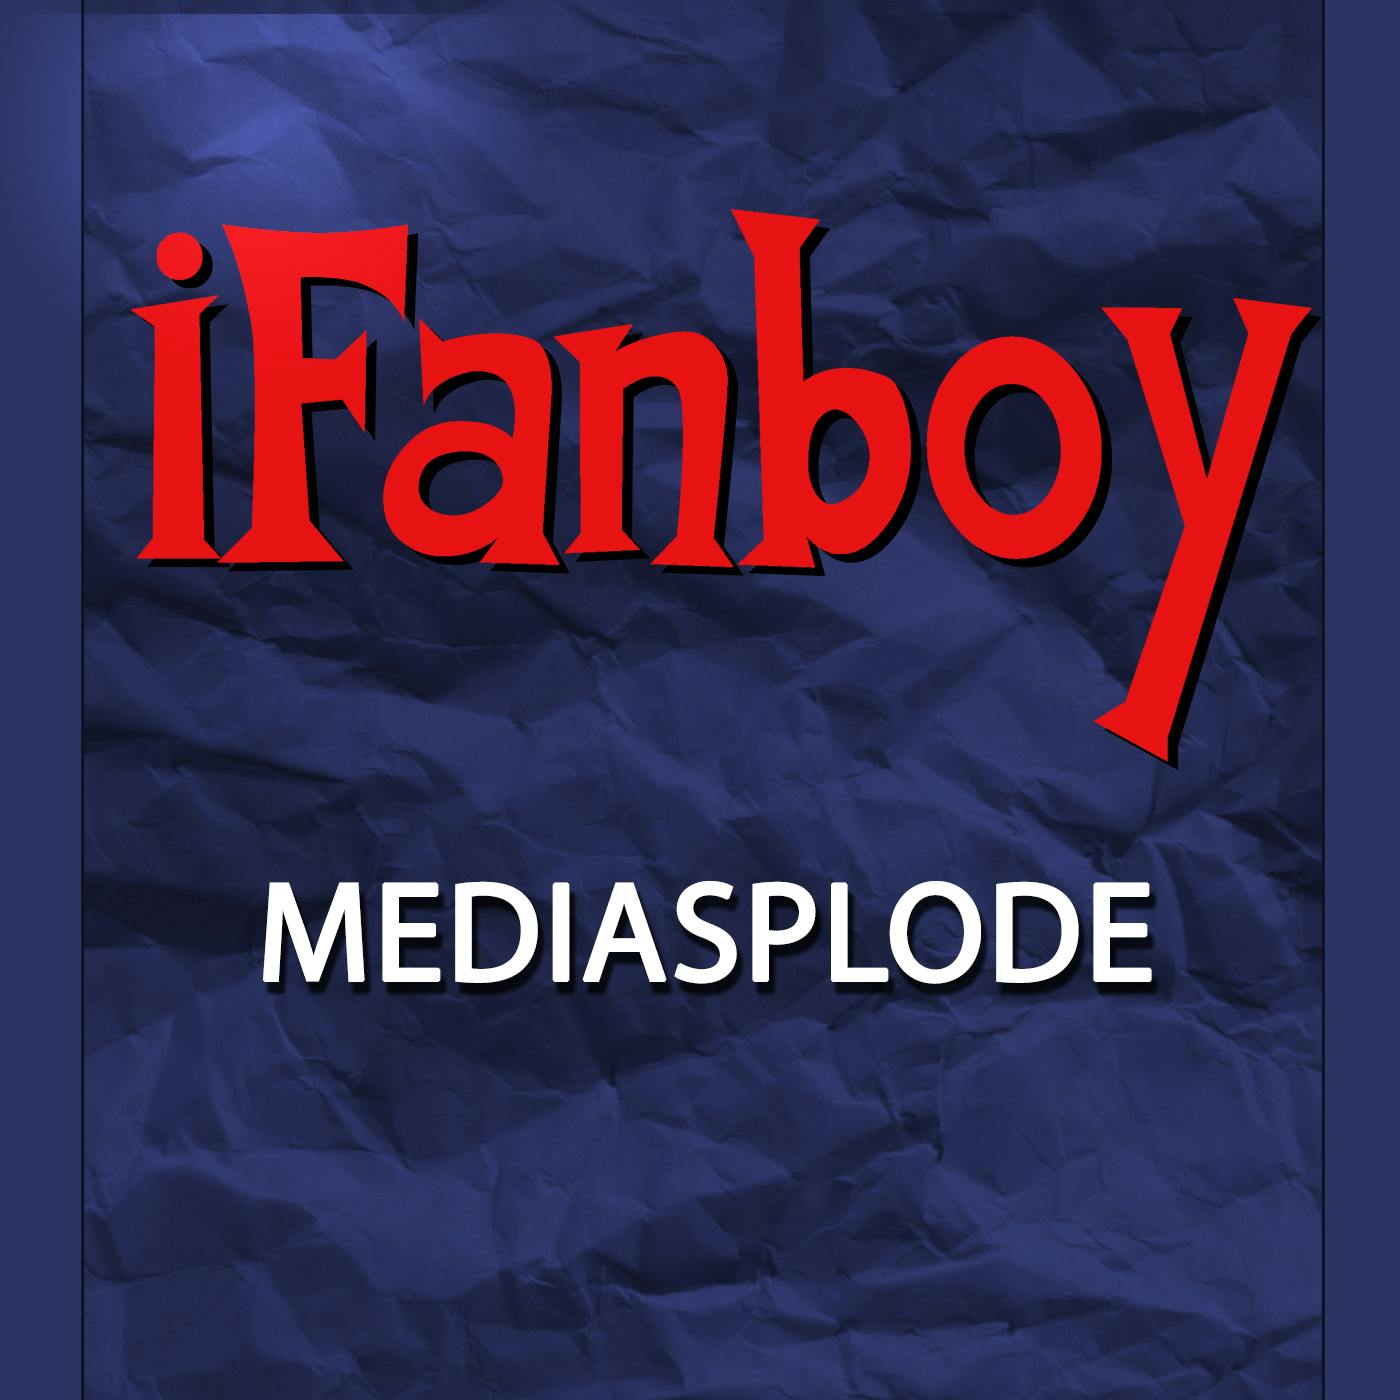 Mediasplode #40 – The HBO Show! The End of ‘Winning Time’, the Future of the Brand, and Our All-Time Favorite Original Series!